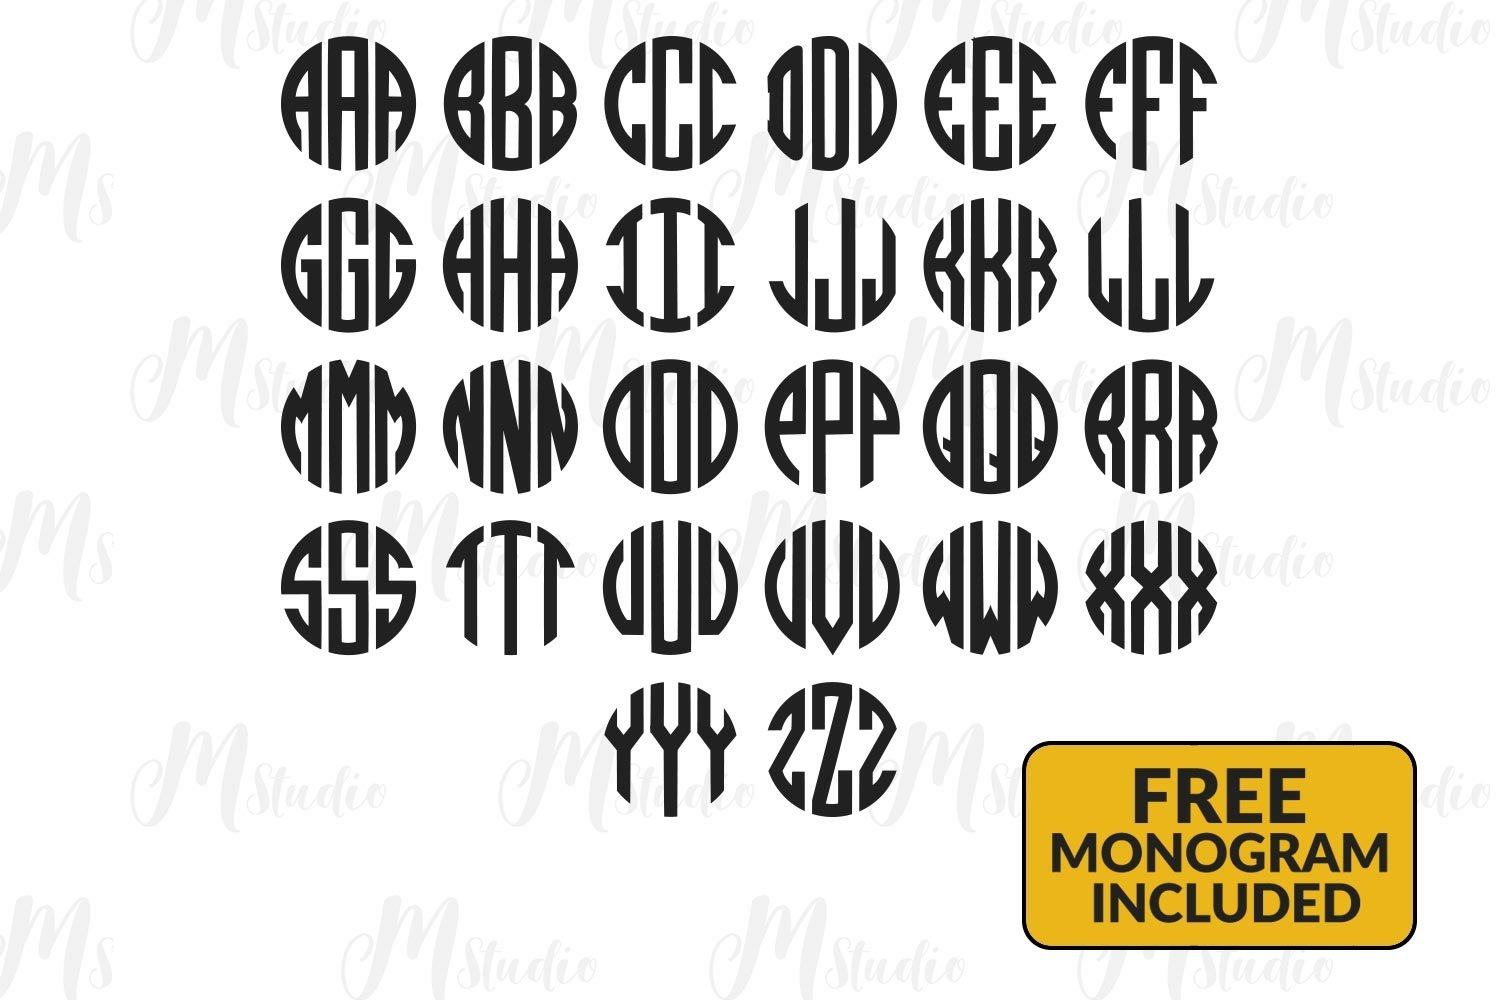 The special monograms for sunflowers.